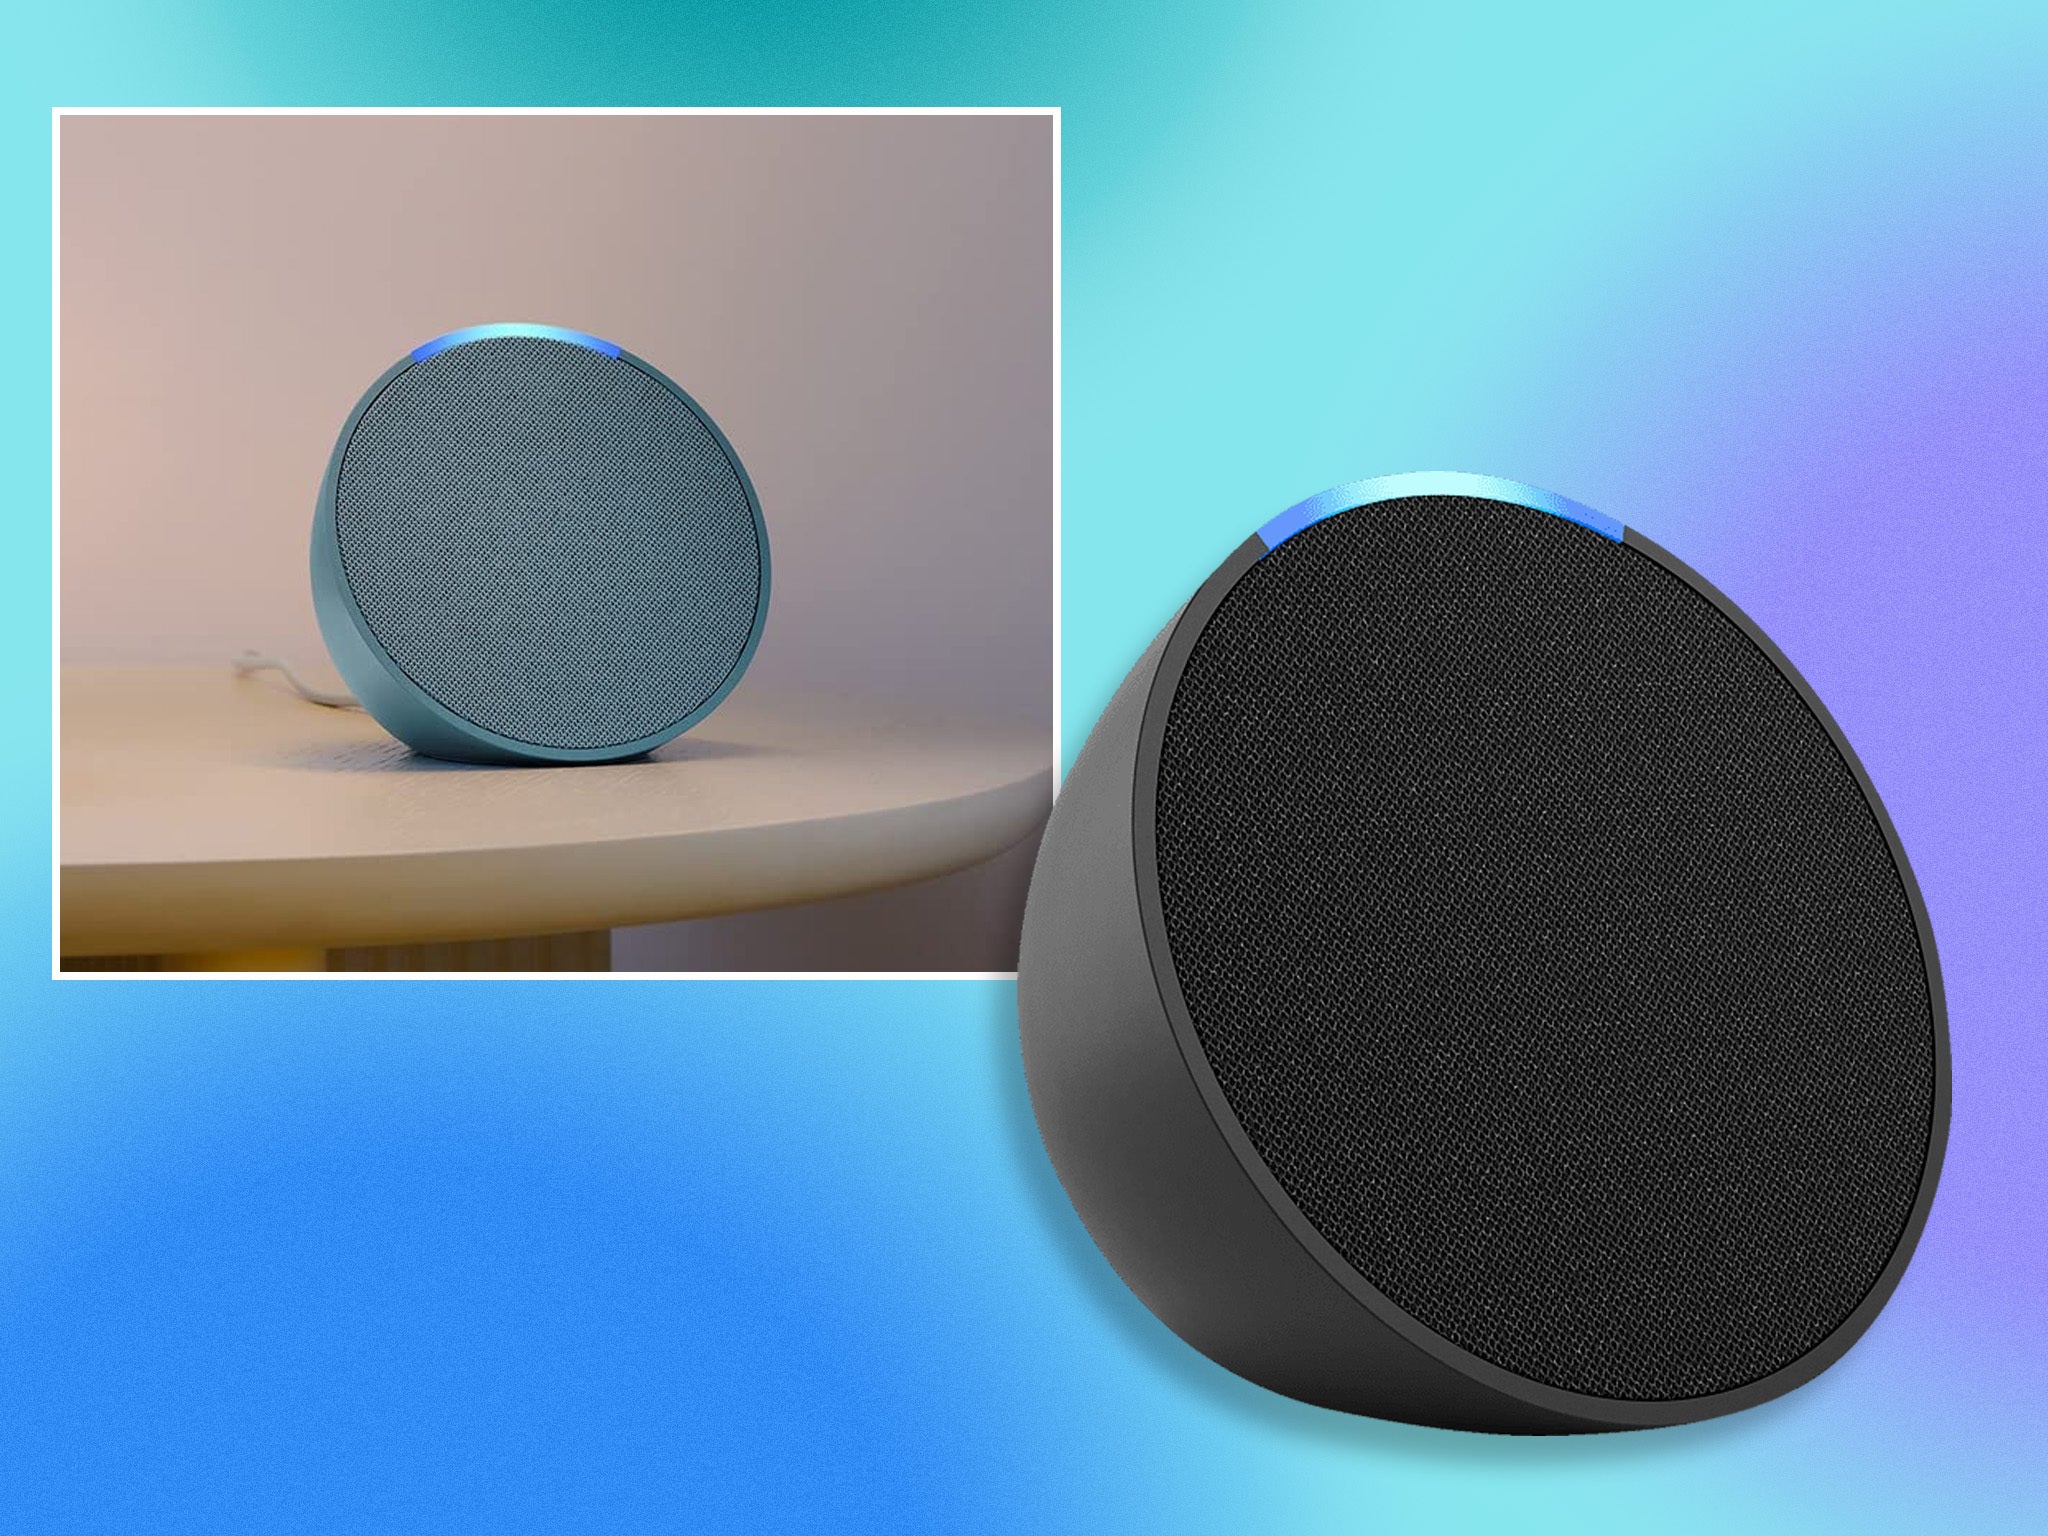 Will we soon have Echo Pops dotted around every room?